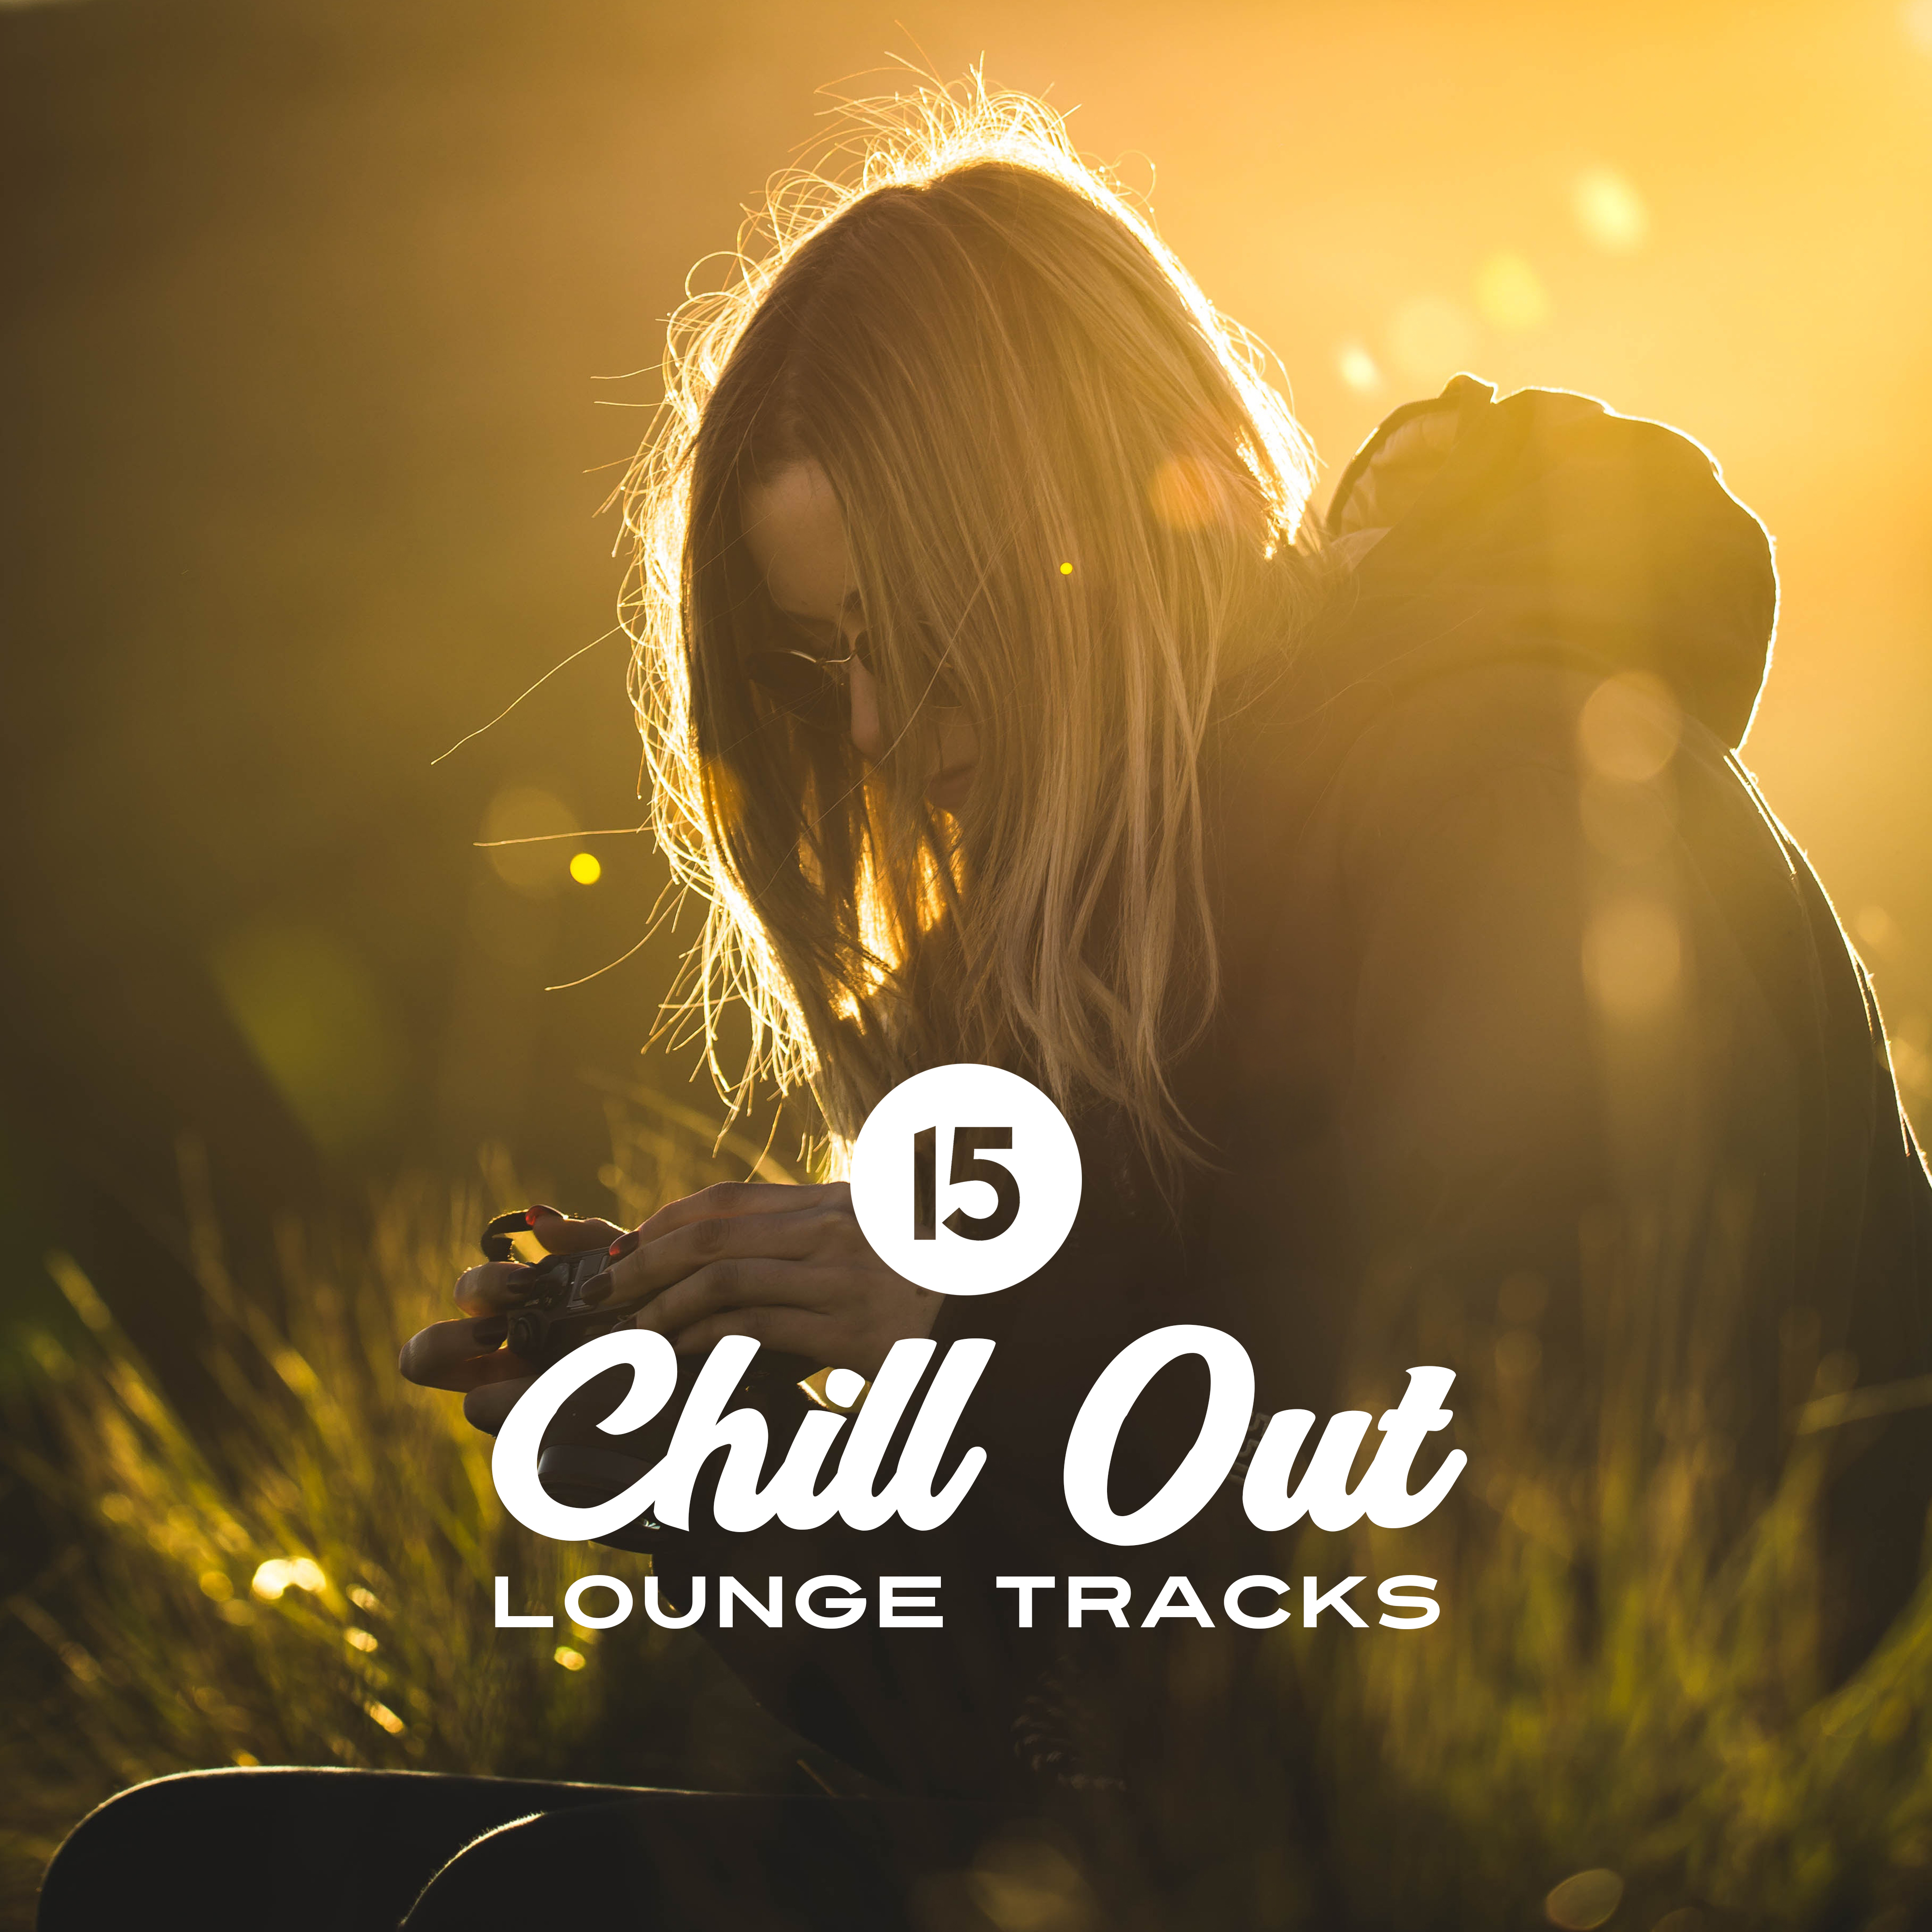 15 Chill Out Lounge Tracks